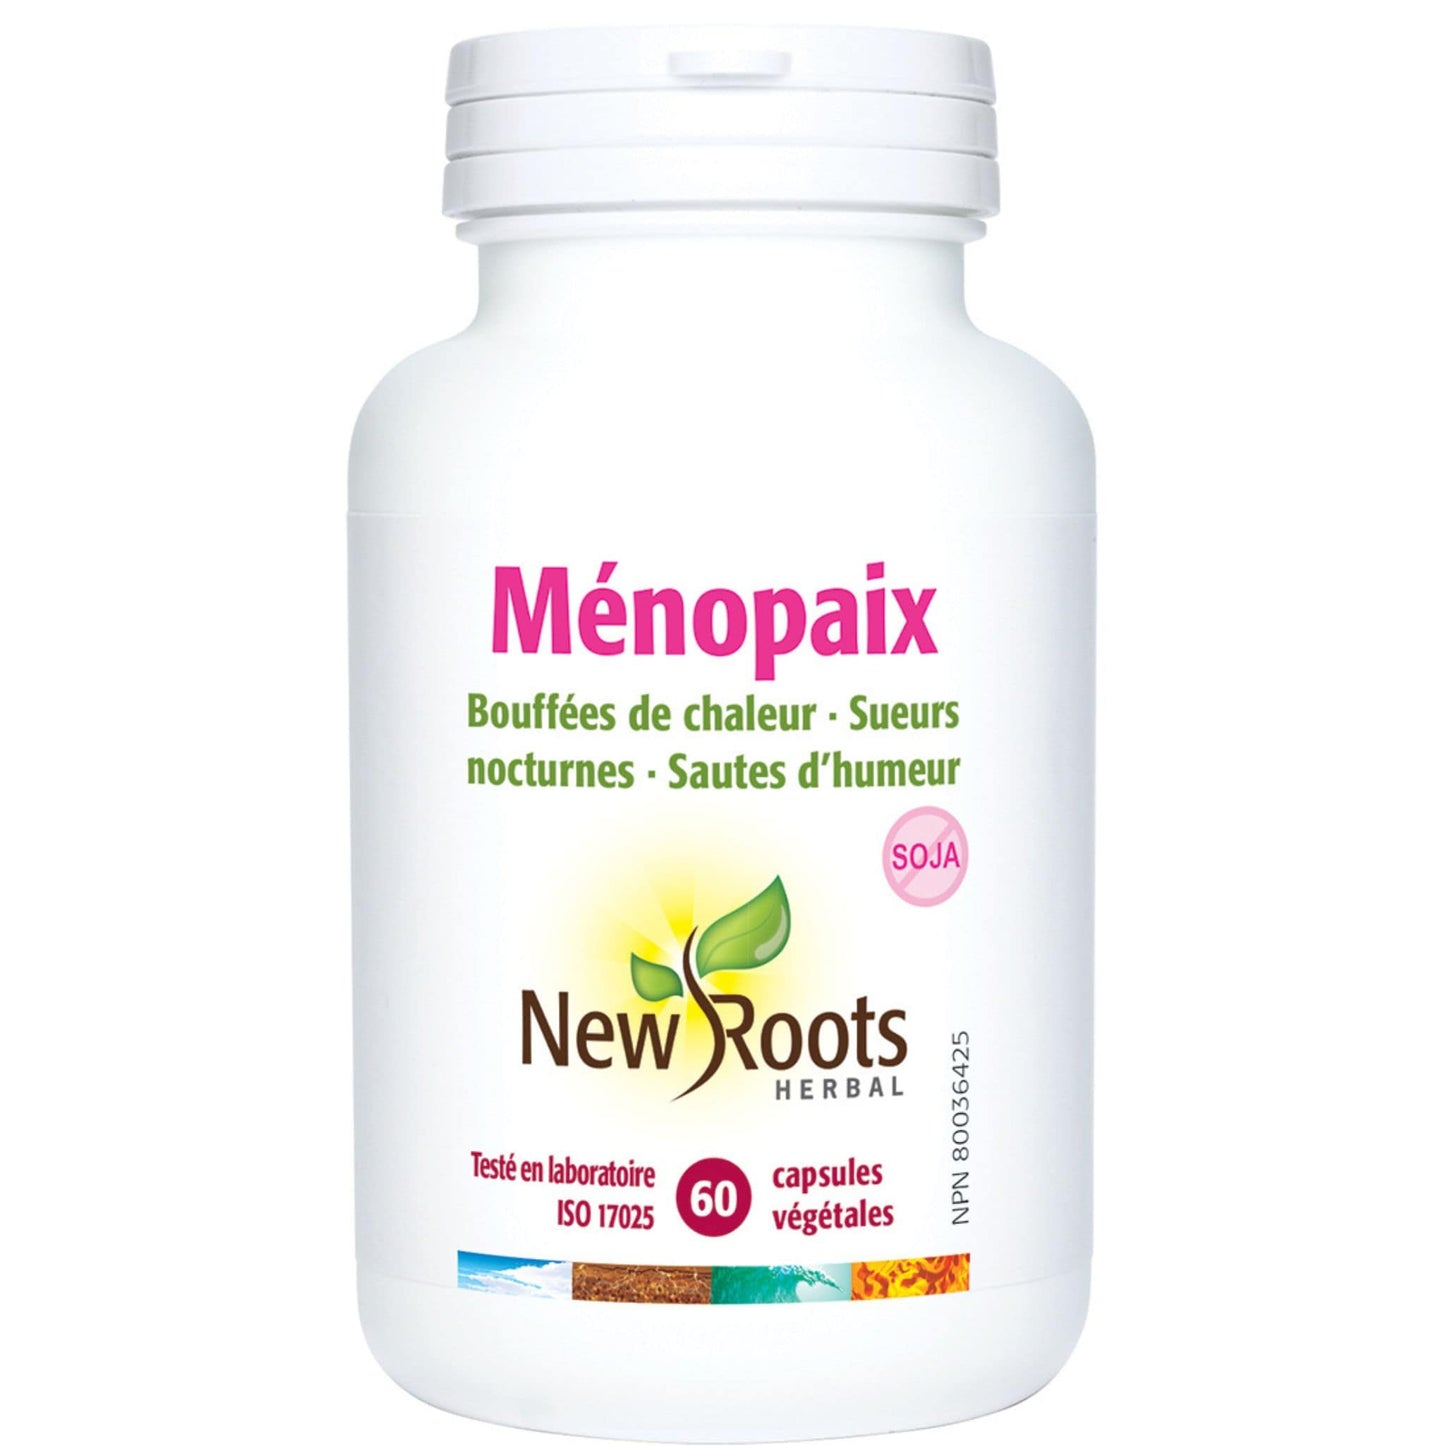 60 Vegetable Capsules | New Roots Herbal Menopeace bottle in french